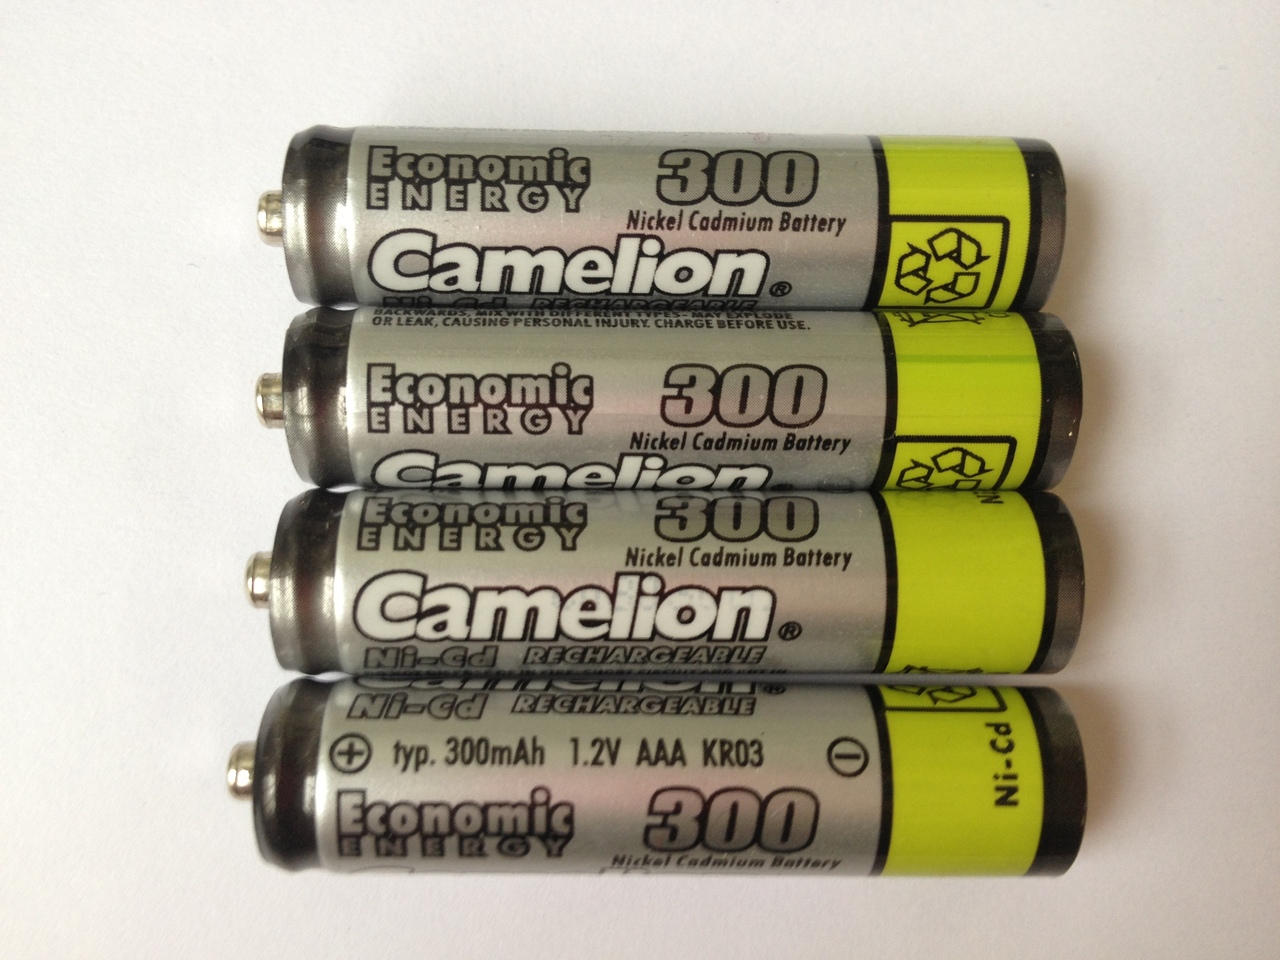 Camelion AAA Rechargeable NiCD Batteries 300mAH 8 Pack + FREE SHIPPING!